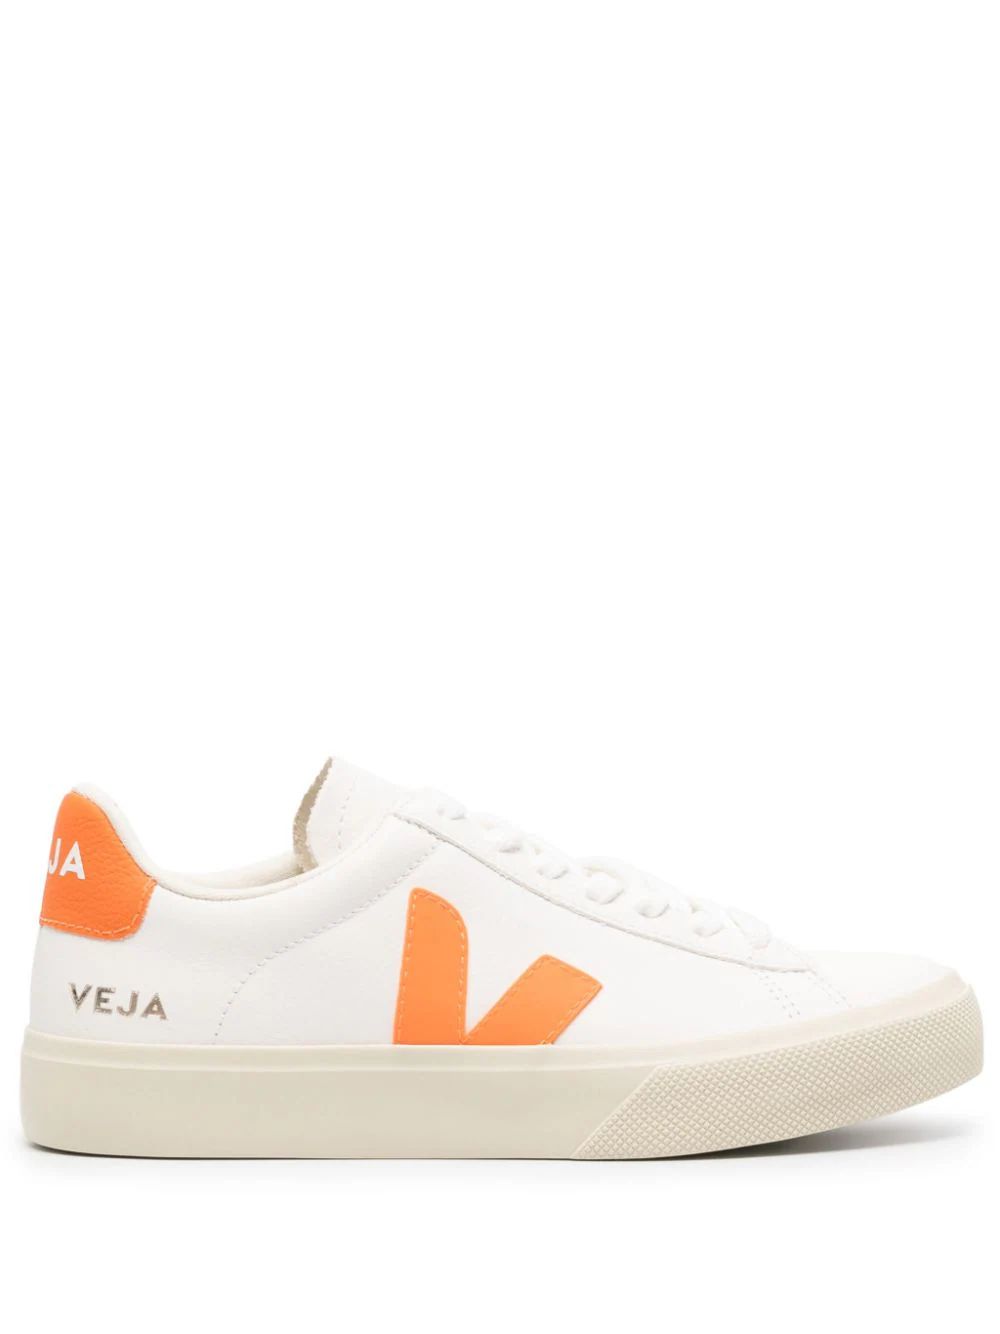 Campo leather sneakers | Farfetch Global